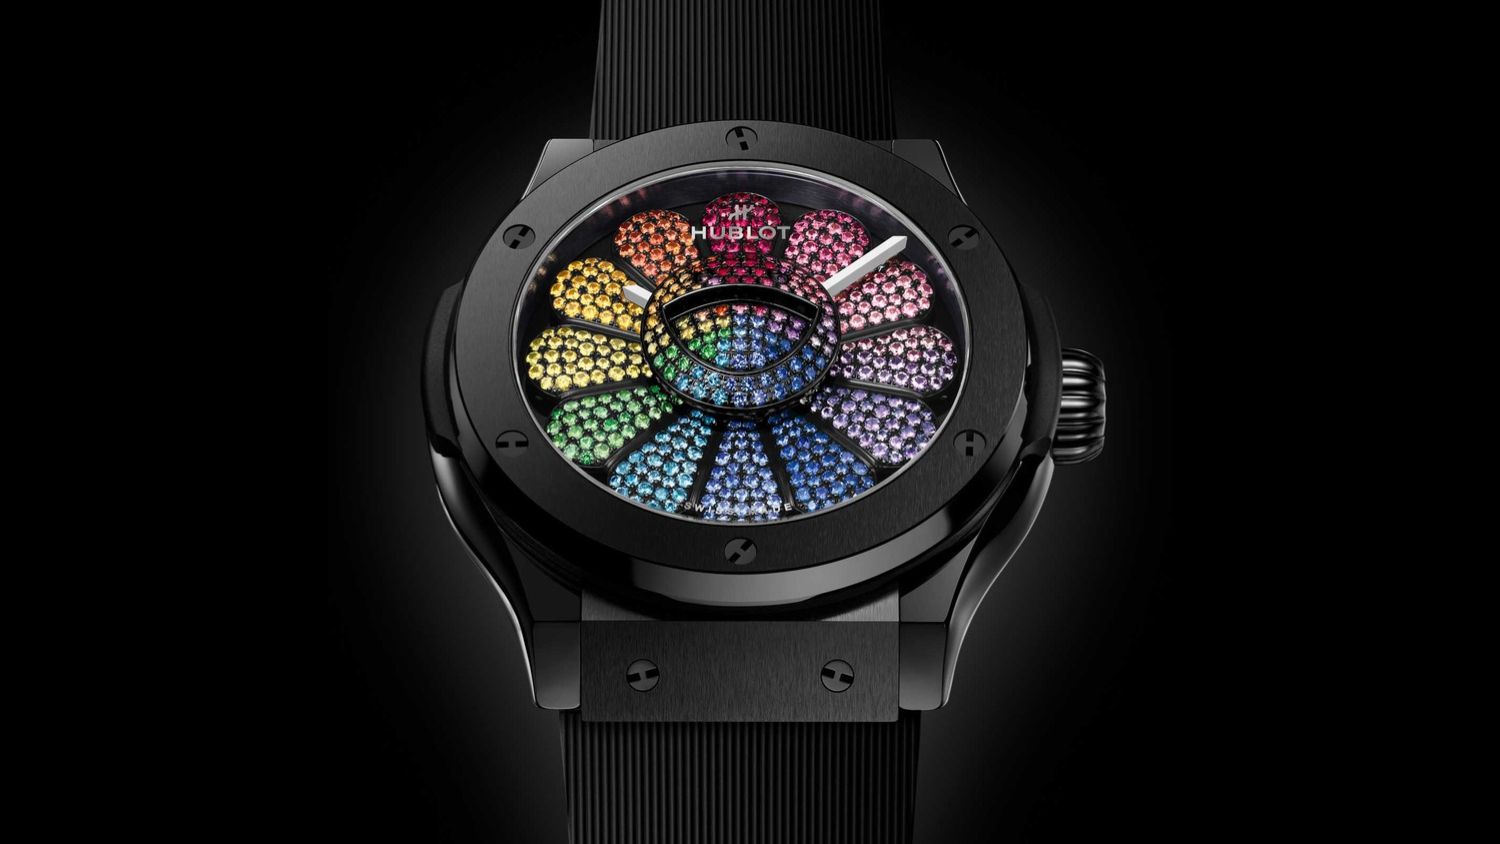 Watches & Wonders Edit: Hublot unveils new models of its iconic